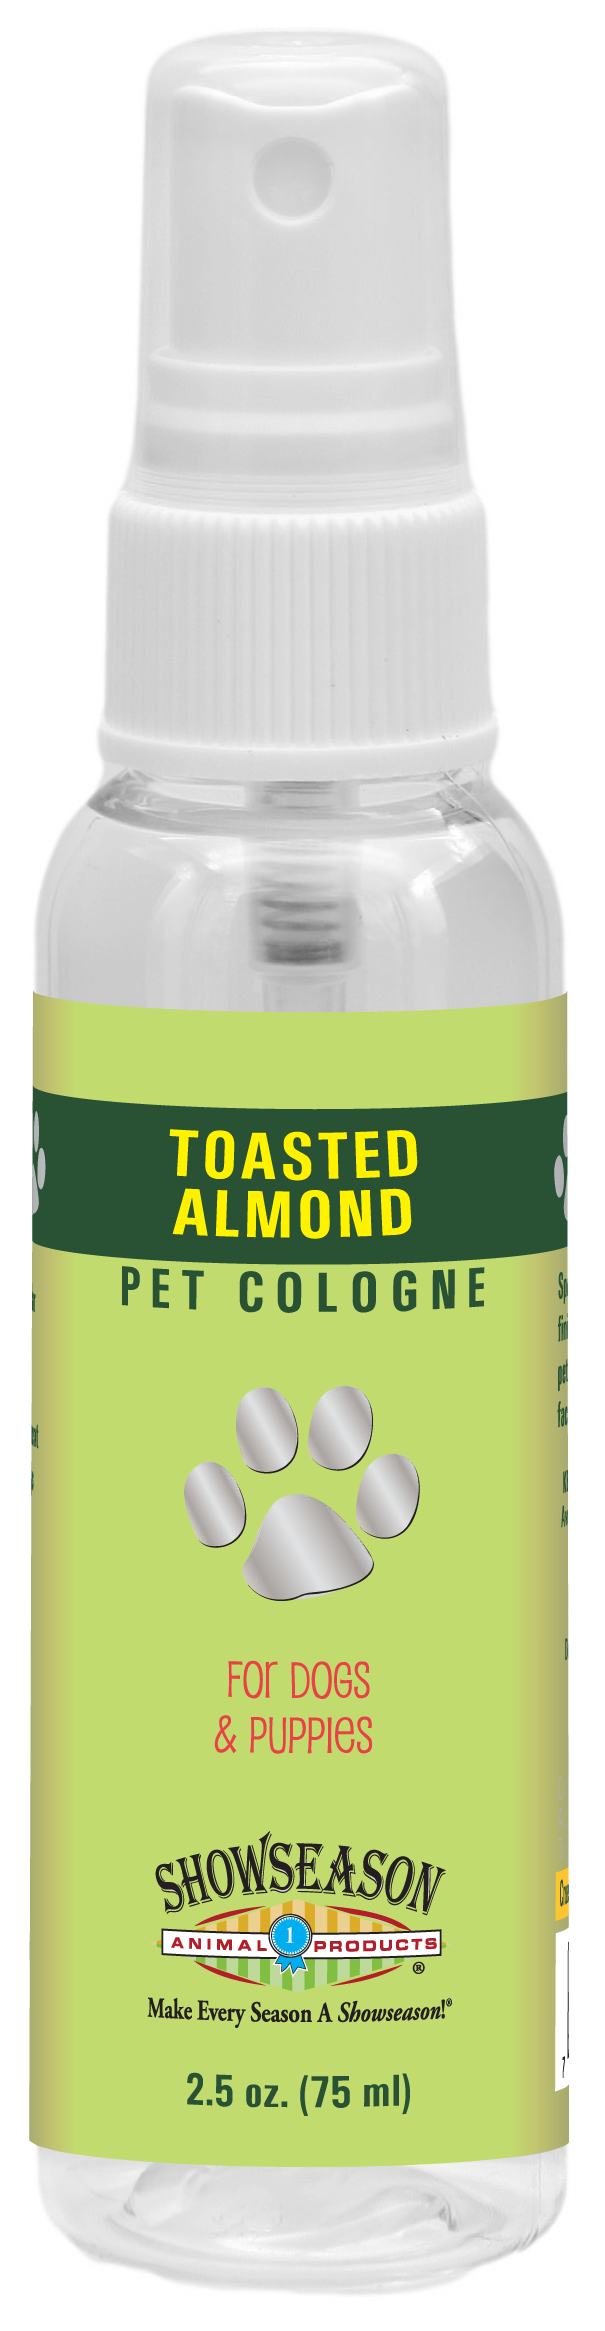 Toasted Almond Pet Cologne | Showseason®